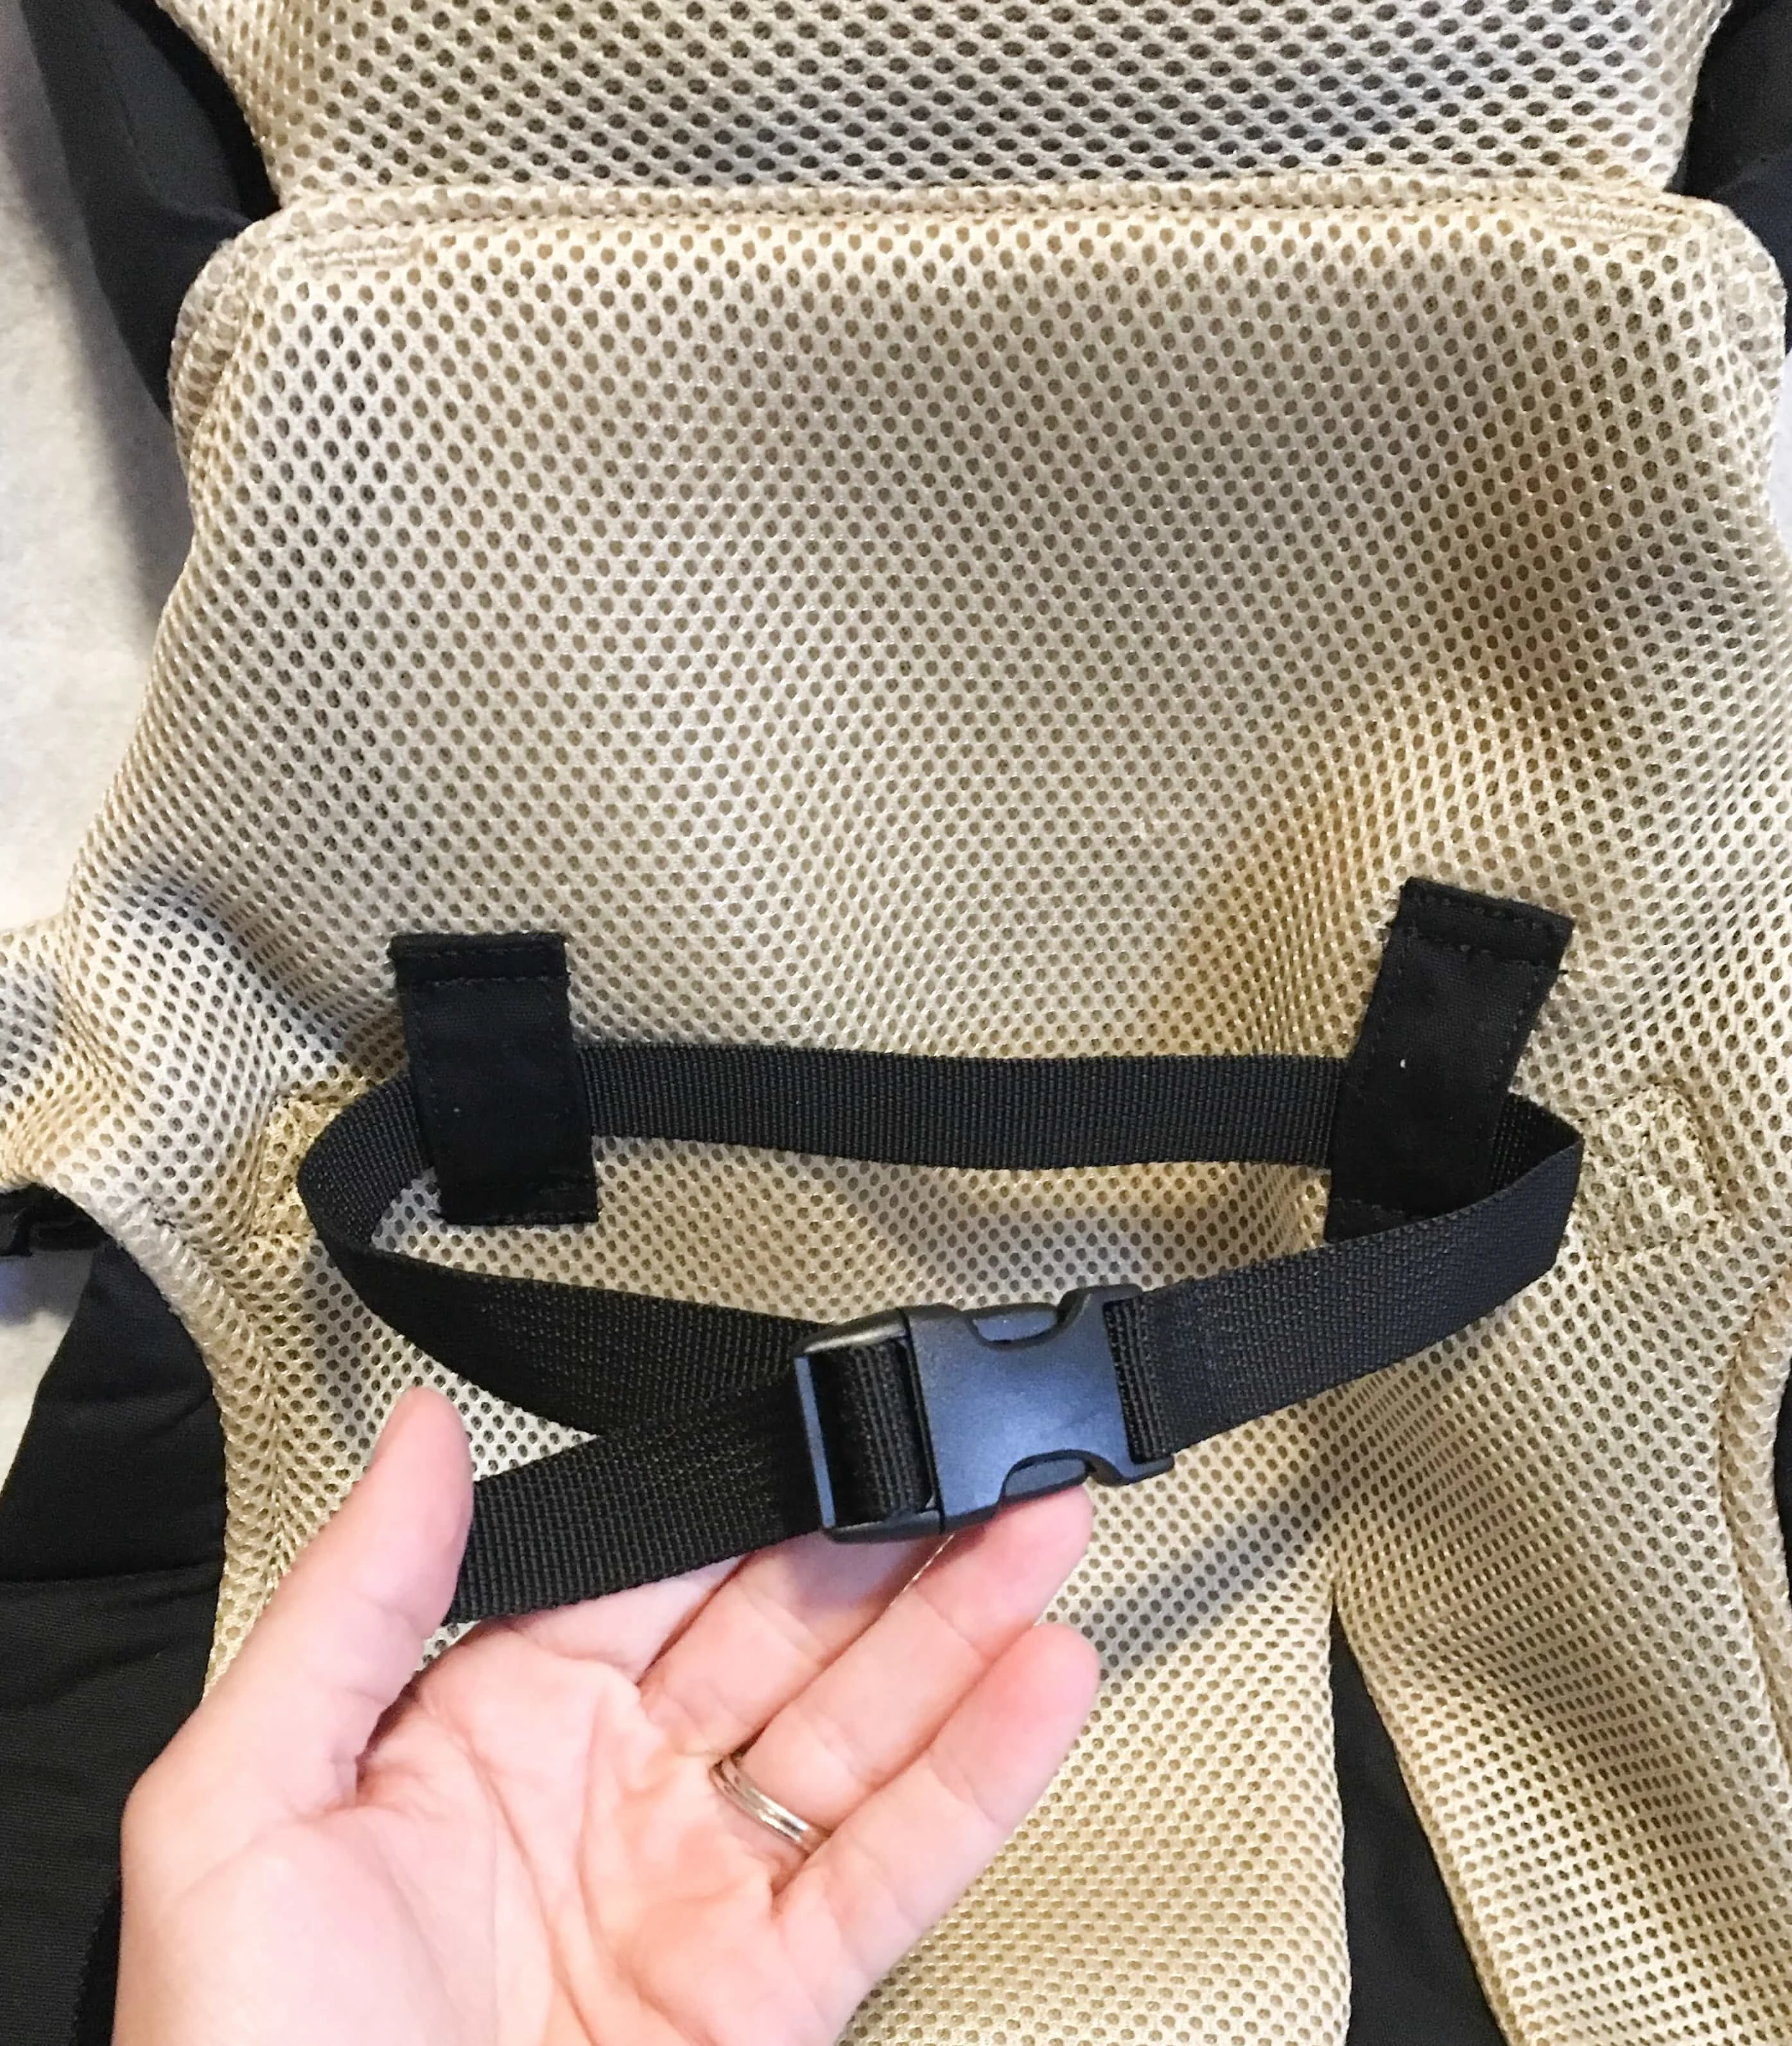 The baby carrier that has it all! I love the versatility and comfort for parent and child! From infant to toddler, this carrier is all you'll need!